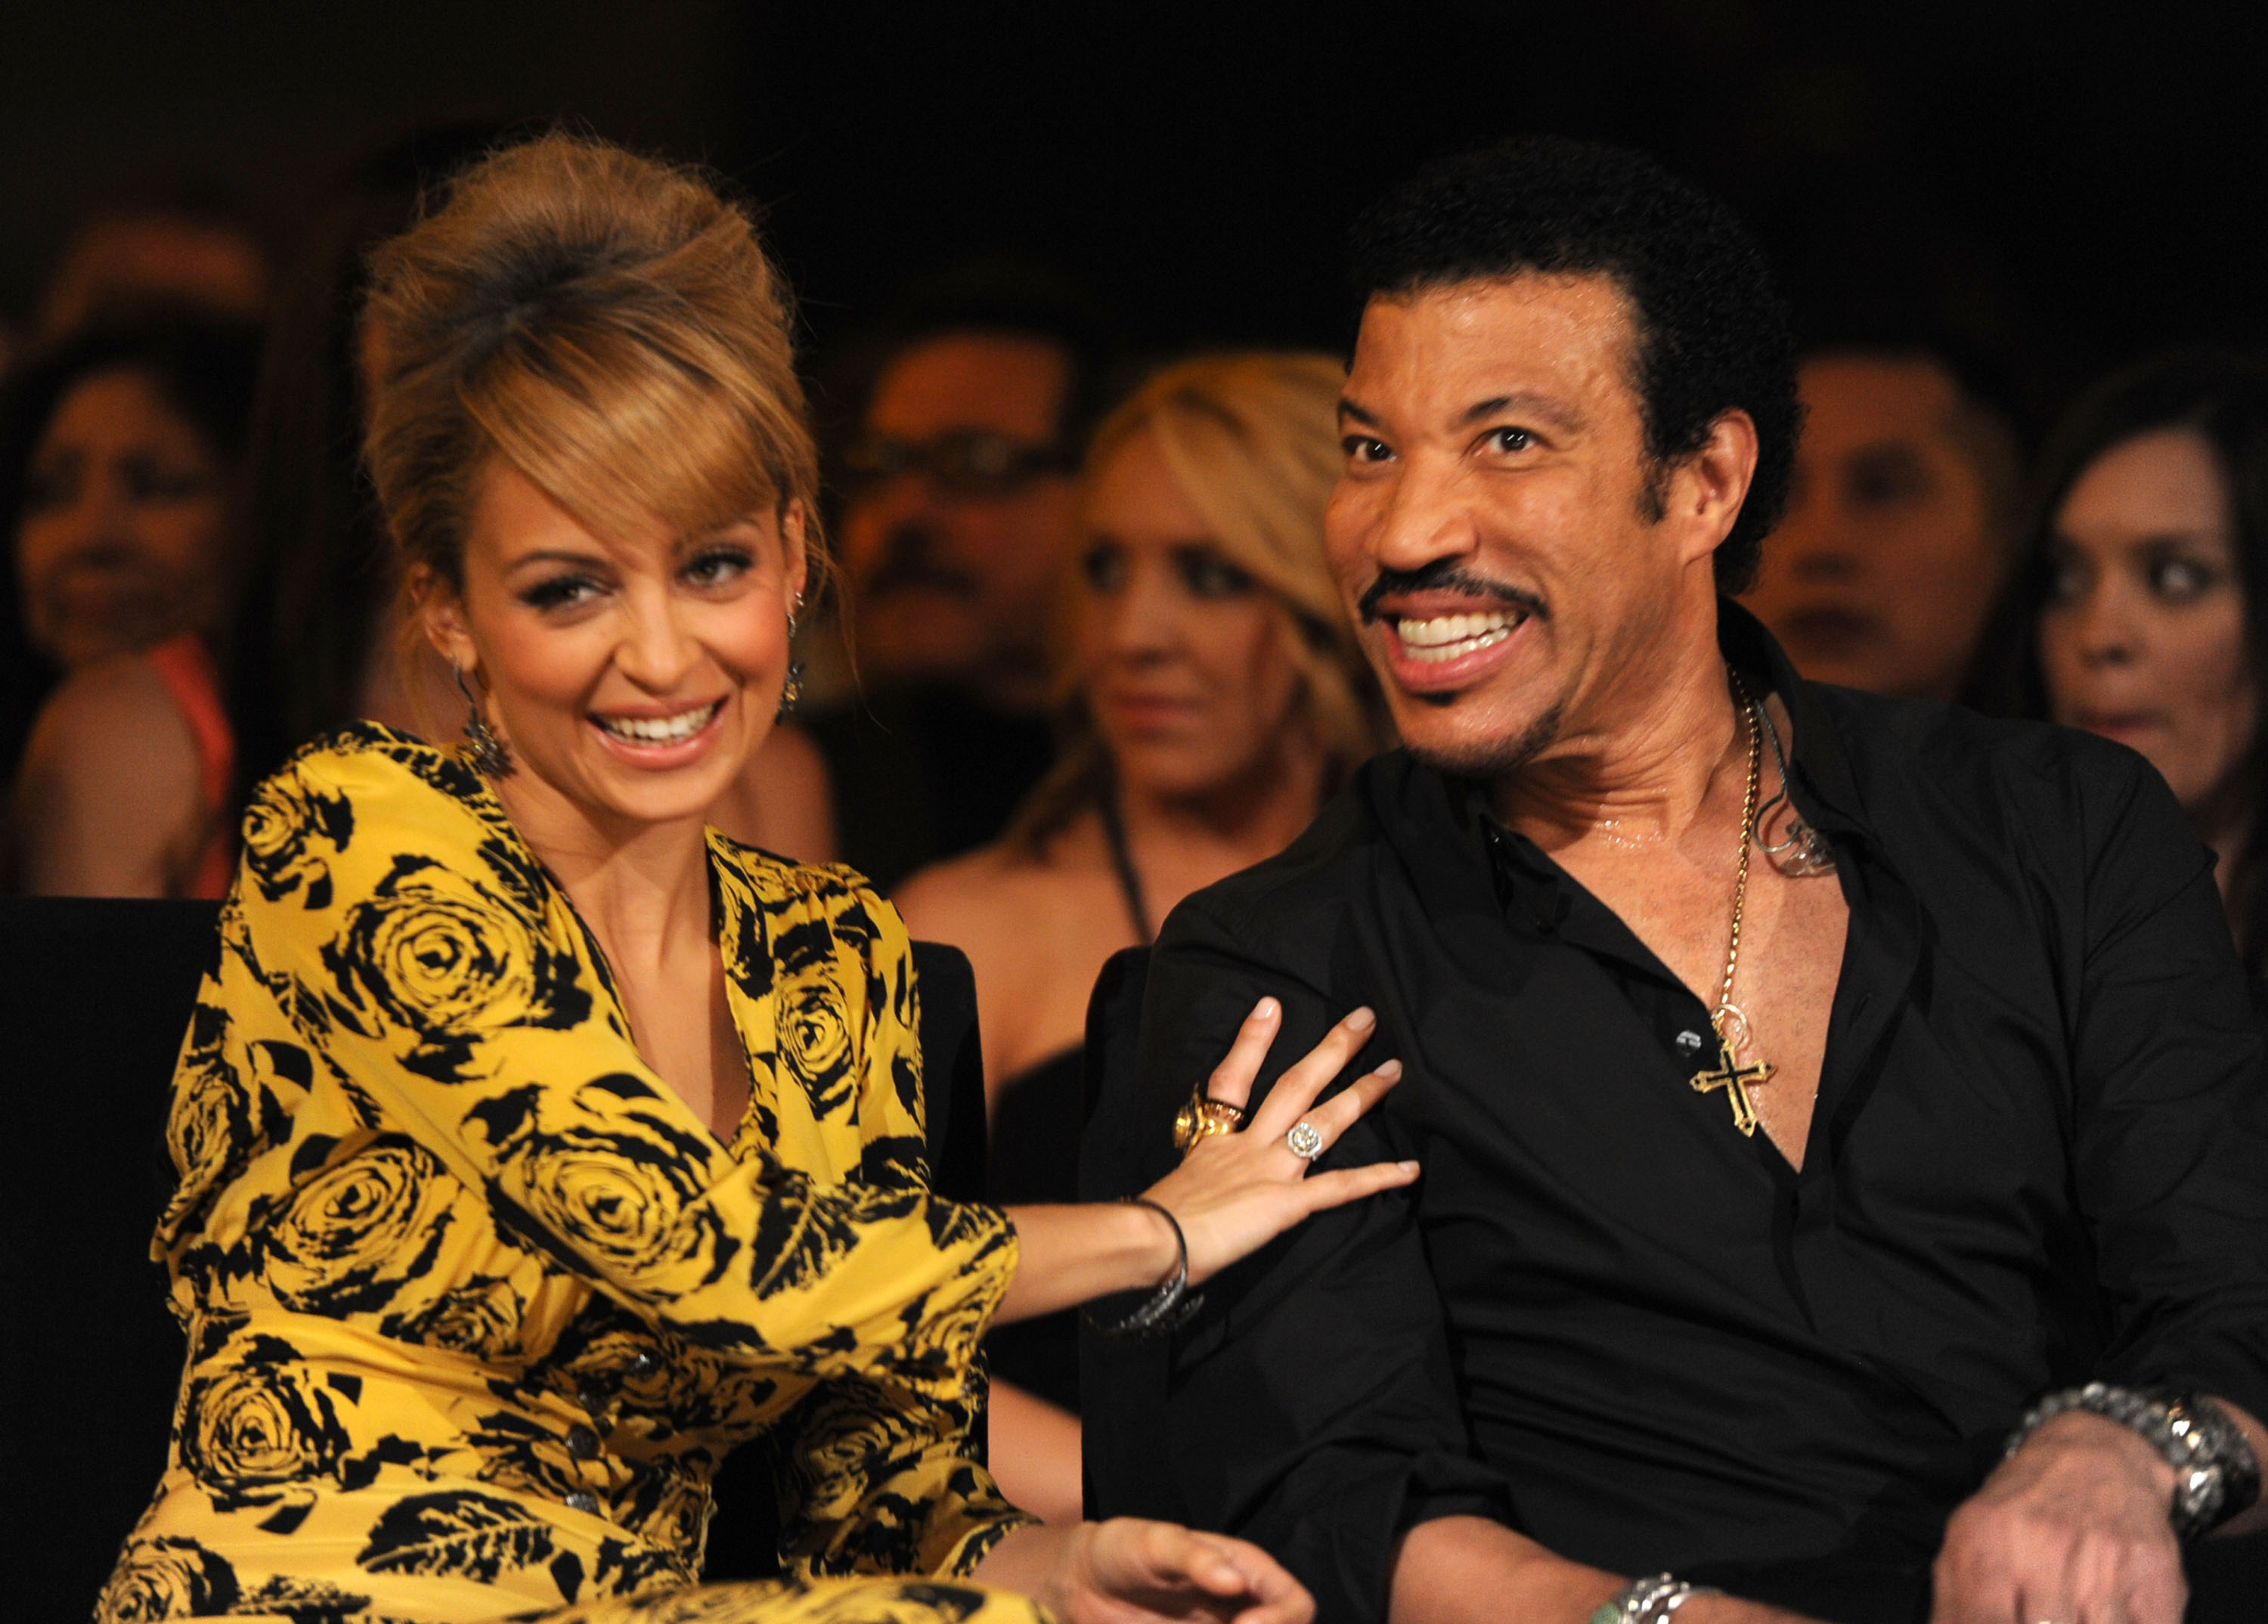 Nicole Richie and Lionel Richie attend the Lionel Richie and Friends in Concert at the MGM Grand Garden Arena on April 2, 2012 in Las Vegas, Nevada. | Source: Getty Images